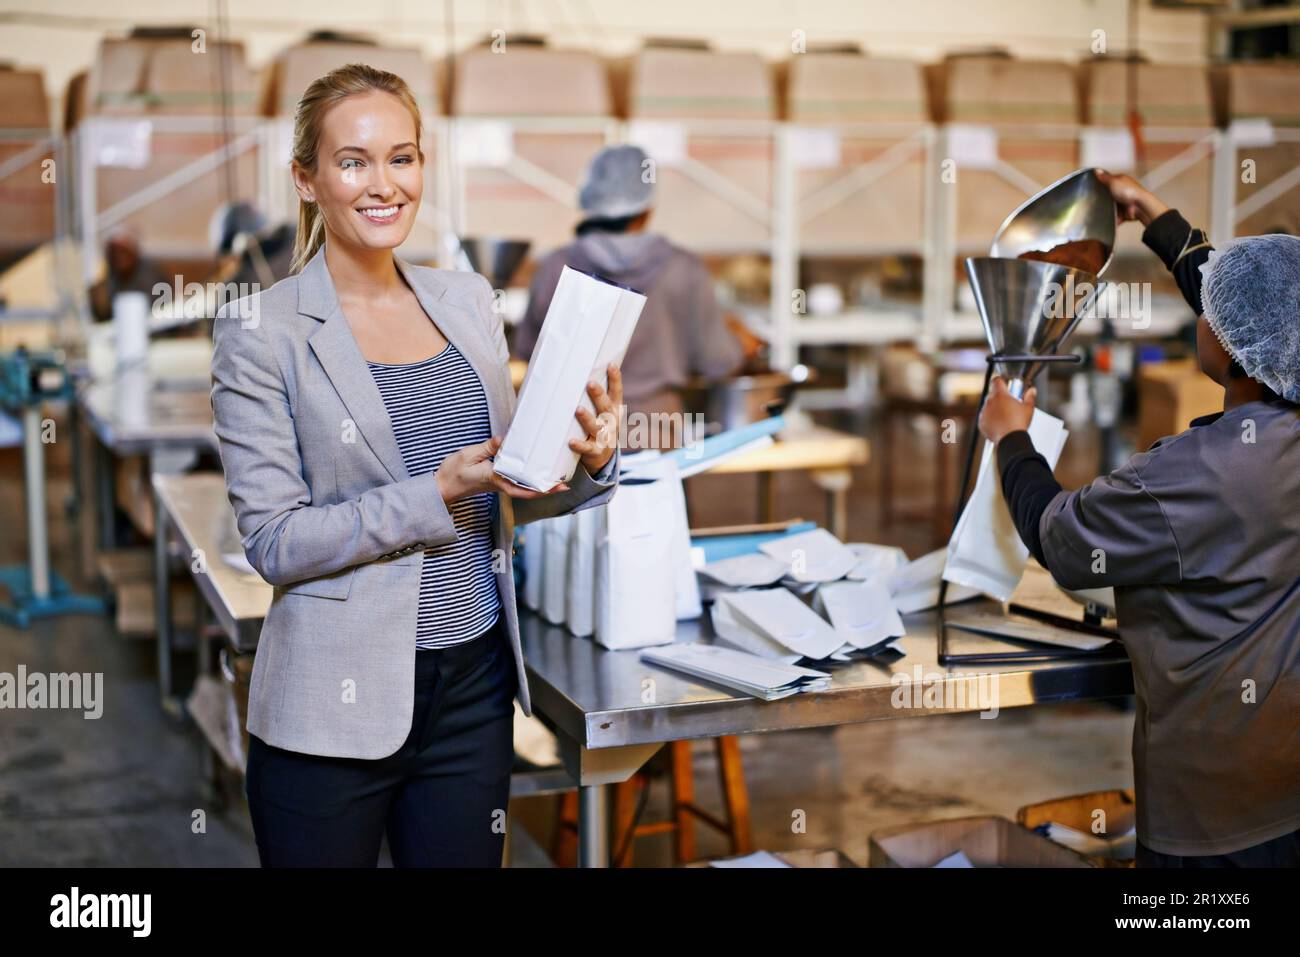 Soon to be the perfect cup of coffee. Portrait of a manager in a warehouse with workers in the background. Stock Photo